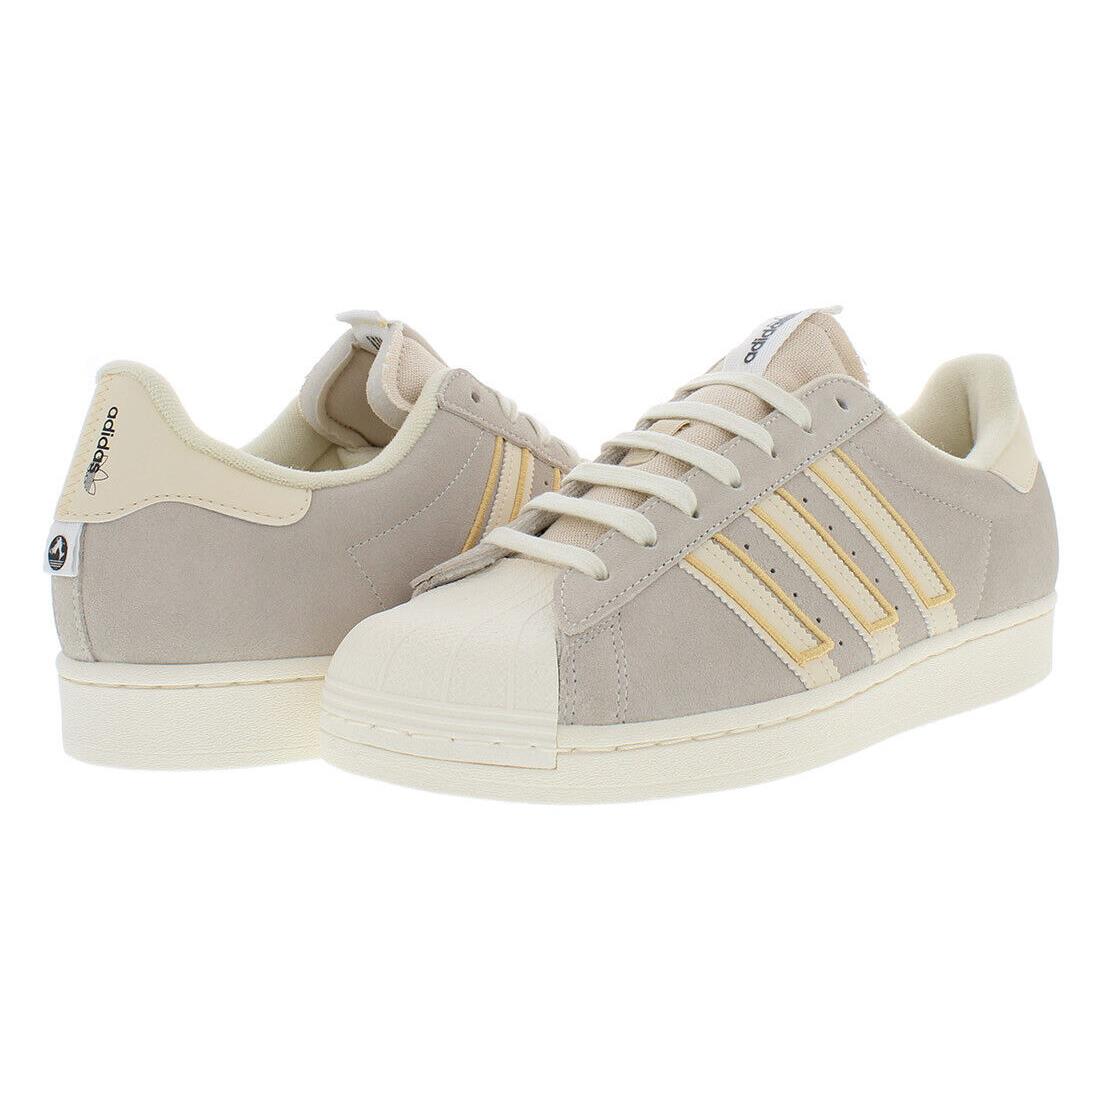 Adidas Superstar Mens Shoes - Taupe, Main: Beige